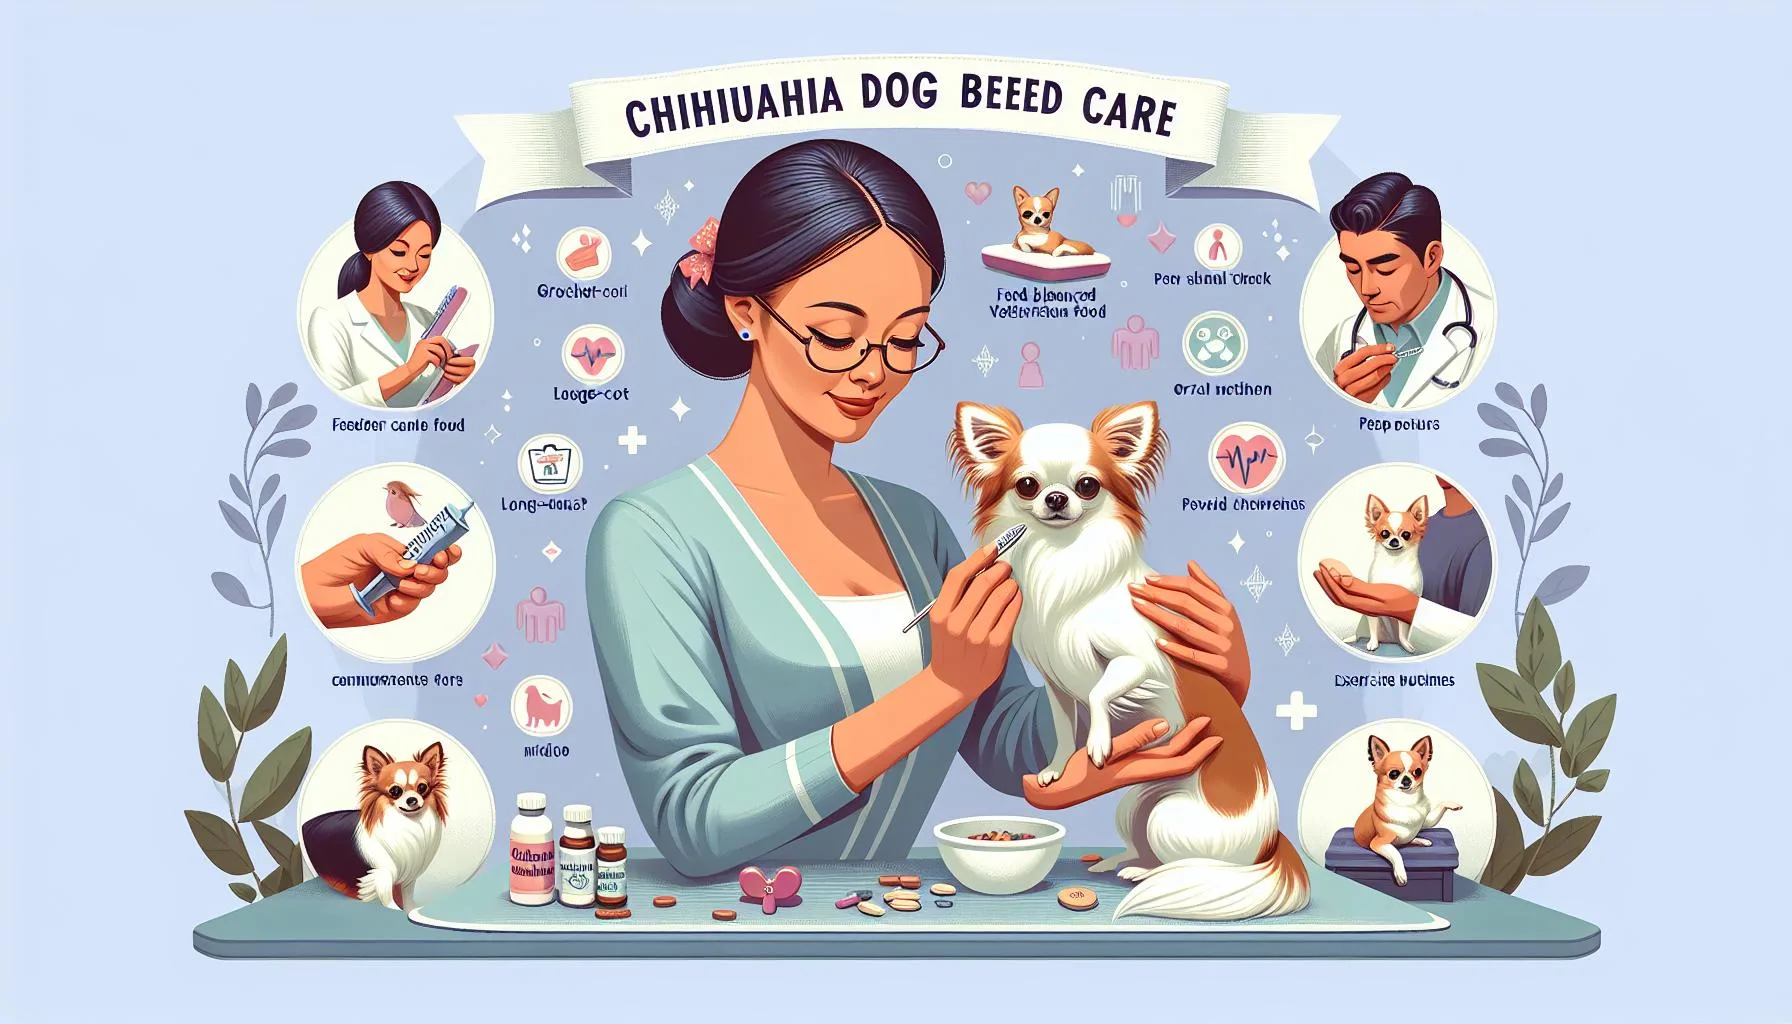 How to Take Care of Chihuahua: Love them, Nurture them!